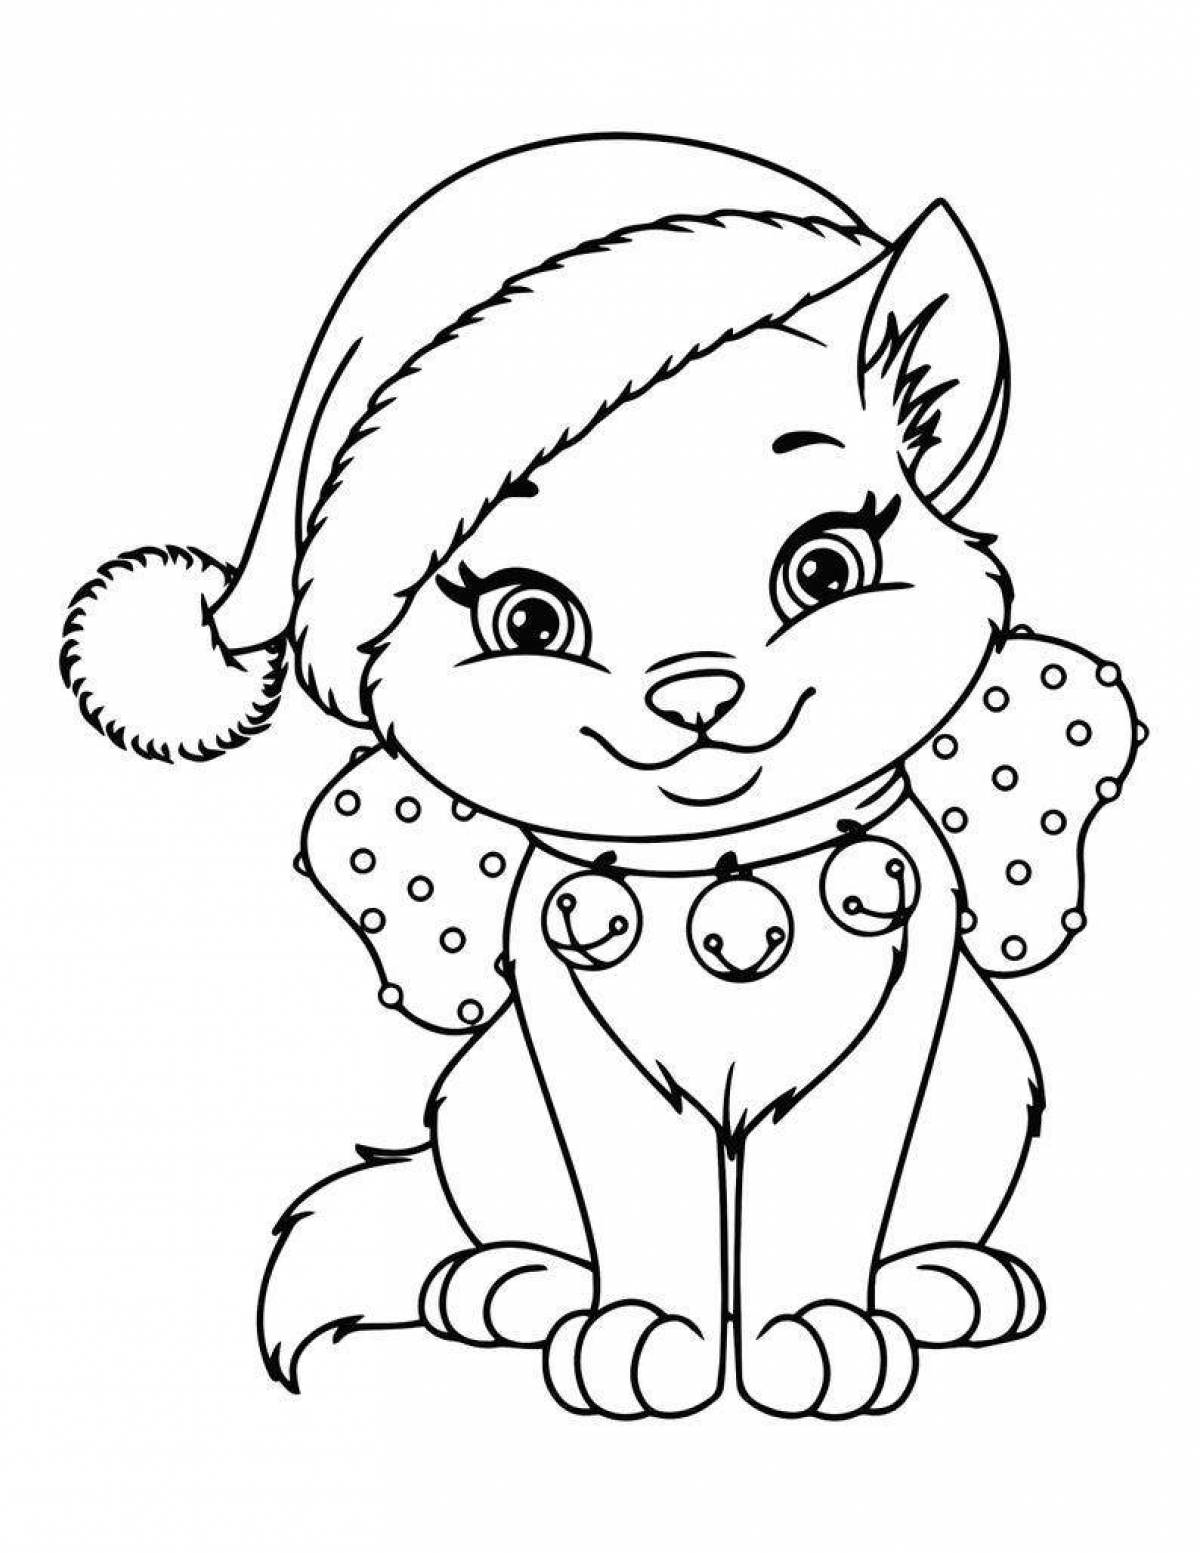 Kitty's bright Christmas coloring book